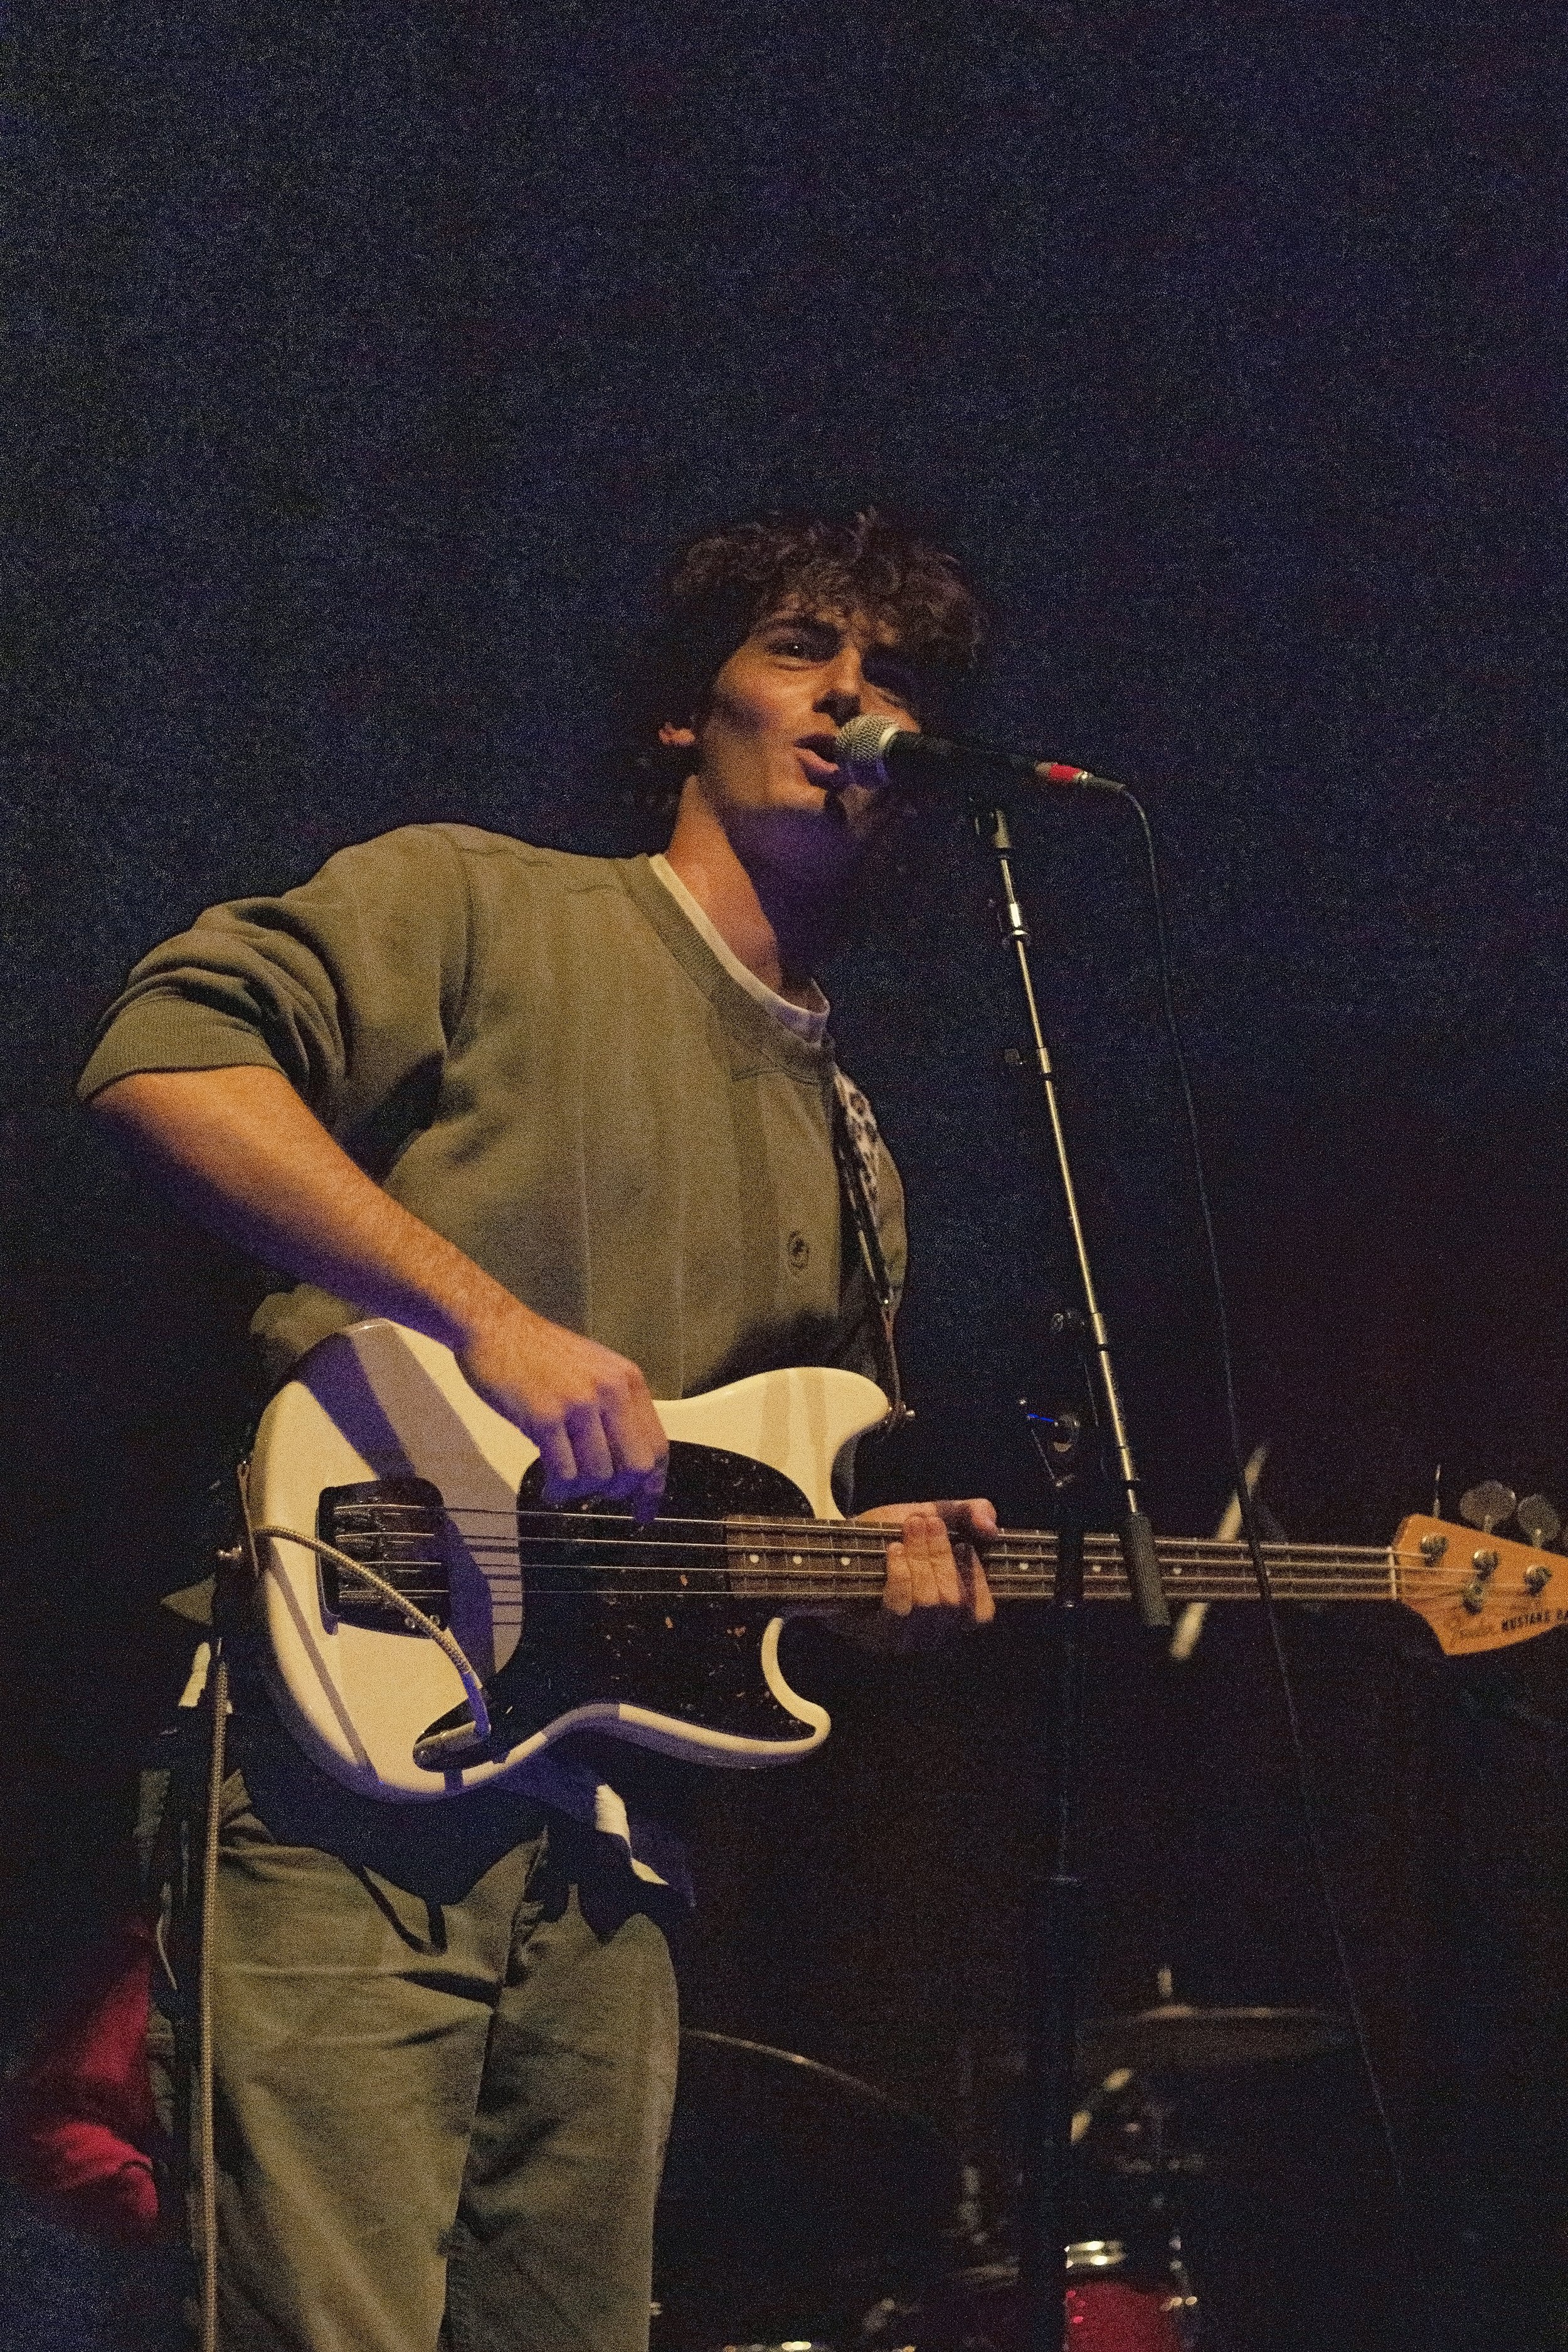  Sun Room bassist Max Pinamonti looks up at a fan in the crowd as he plays 